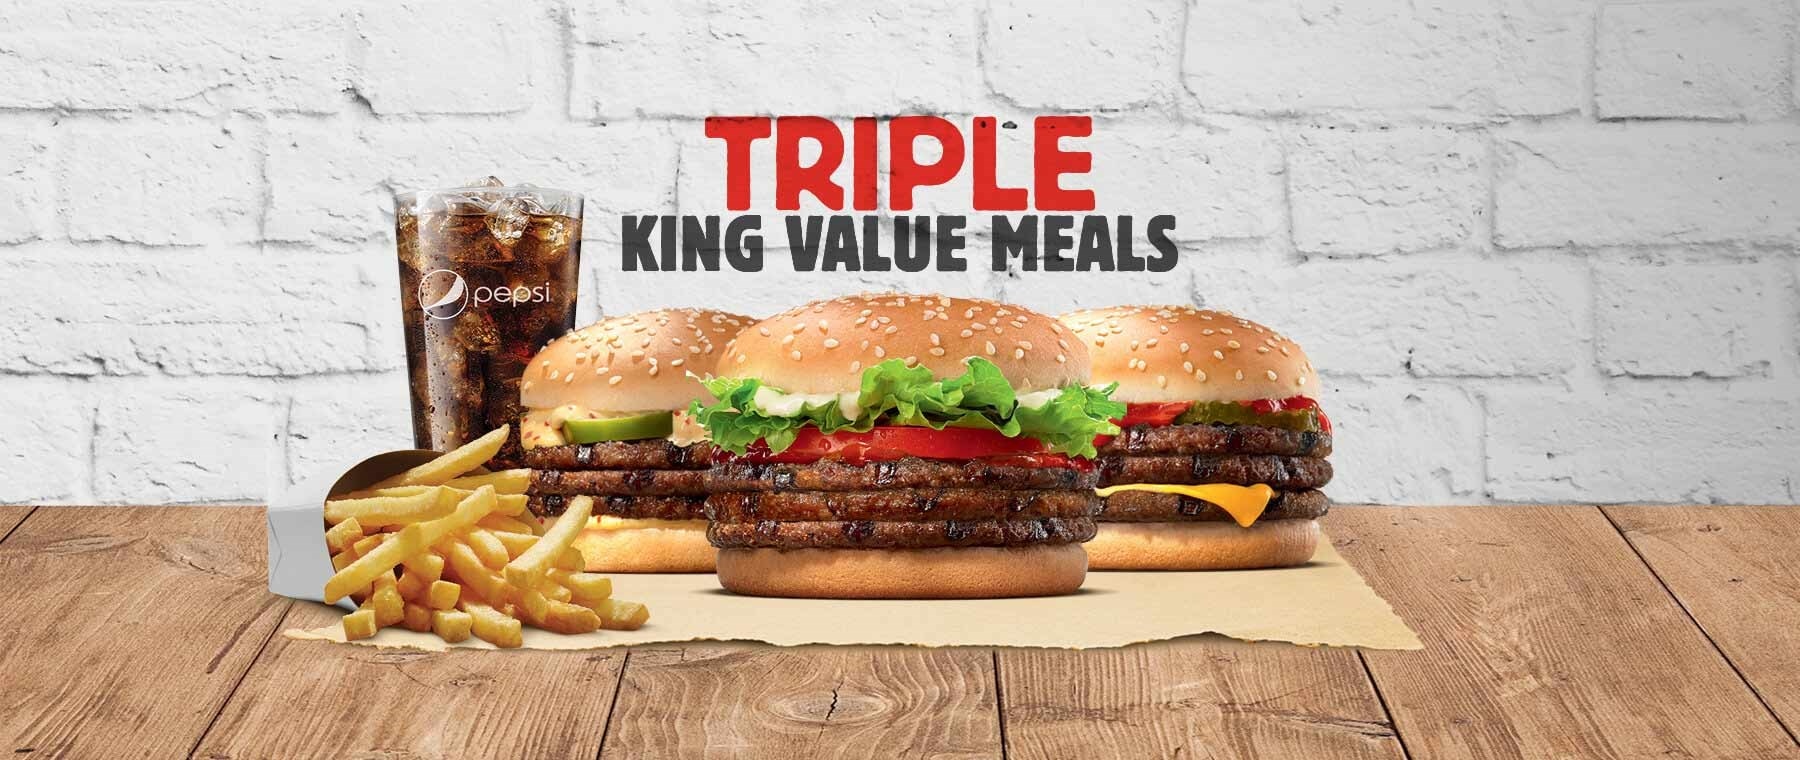 Burger King, Find Burger King Store Near Me and Burger King Hours - Near me